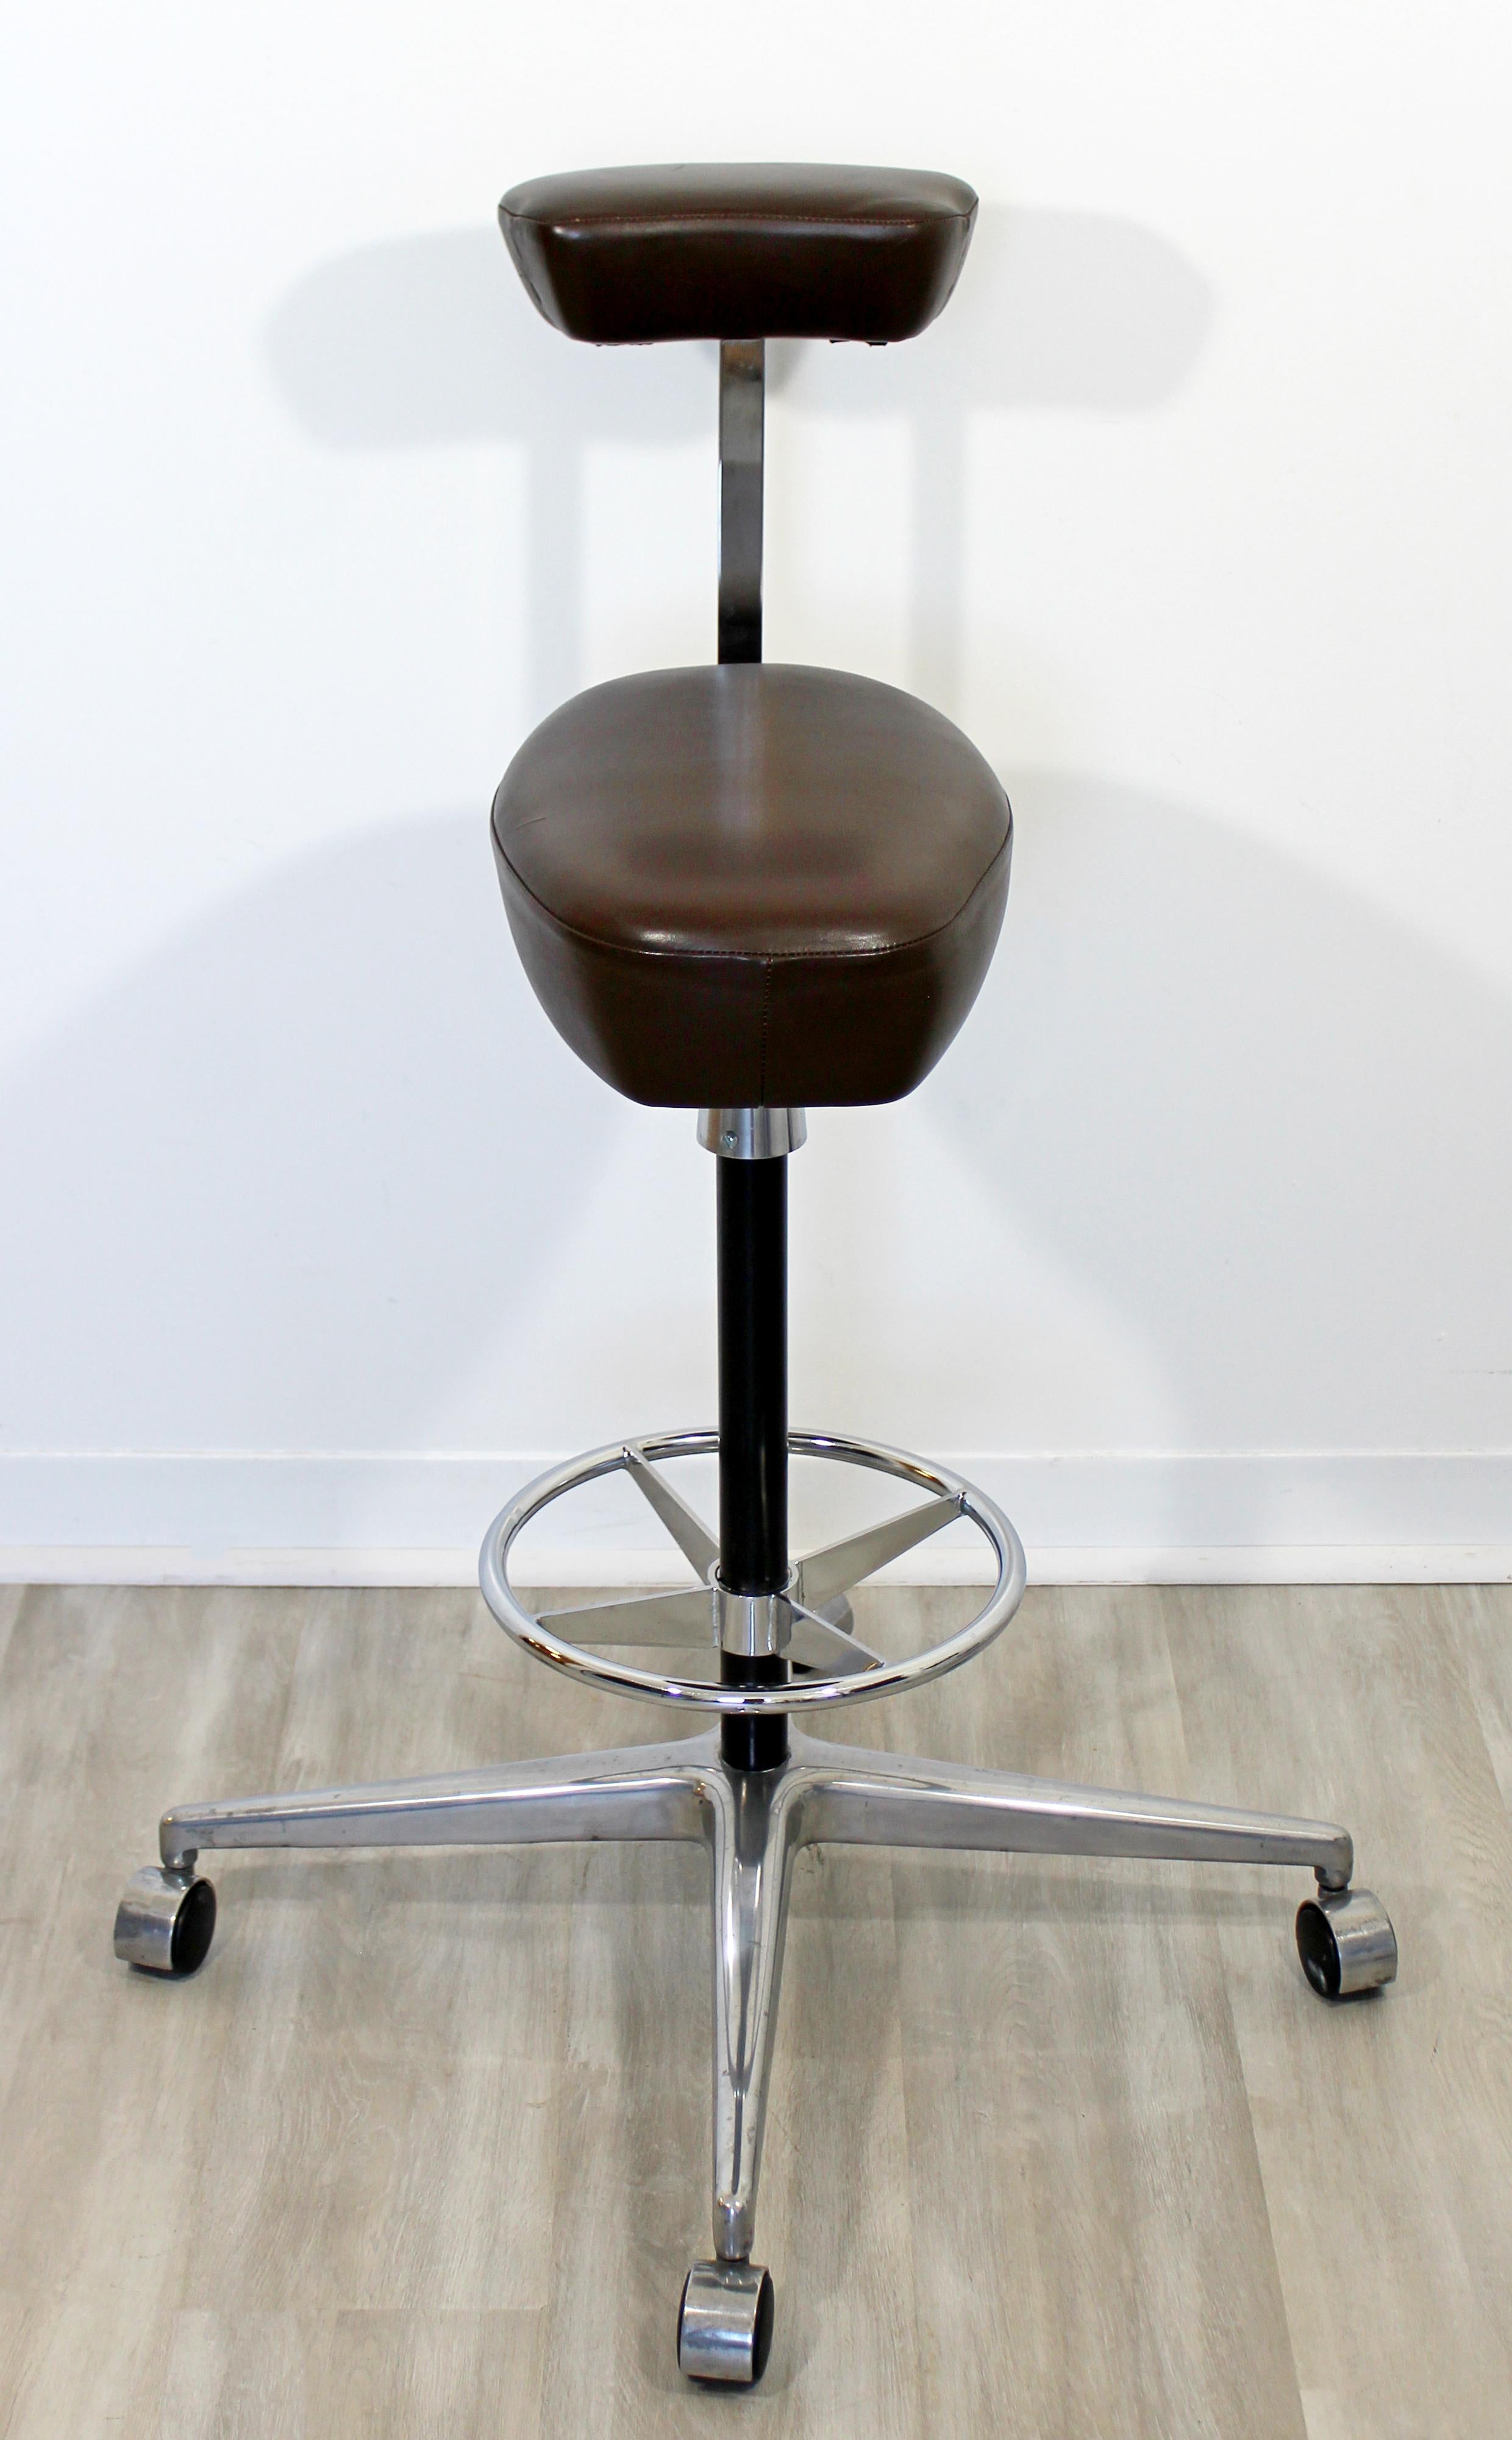 For your consideration is an original, brown leather, swivel drafting stool by Robert Probst & George Nelson for Herman Miller, circa 1960s. In excellent vintage condition. The dimensions of the base are 28